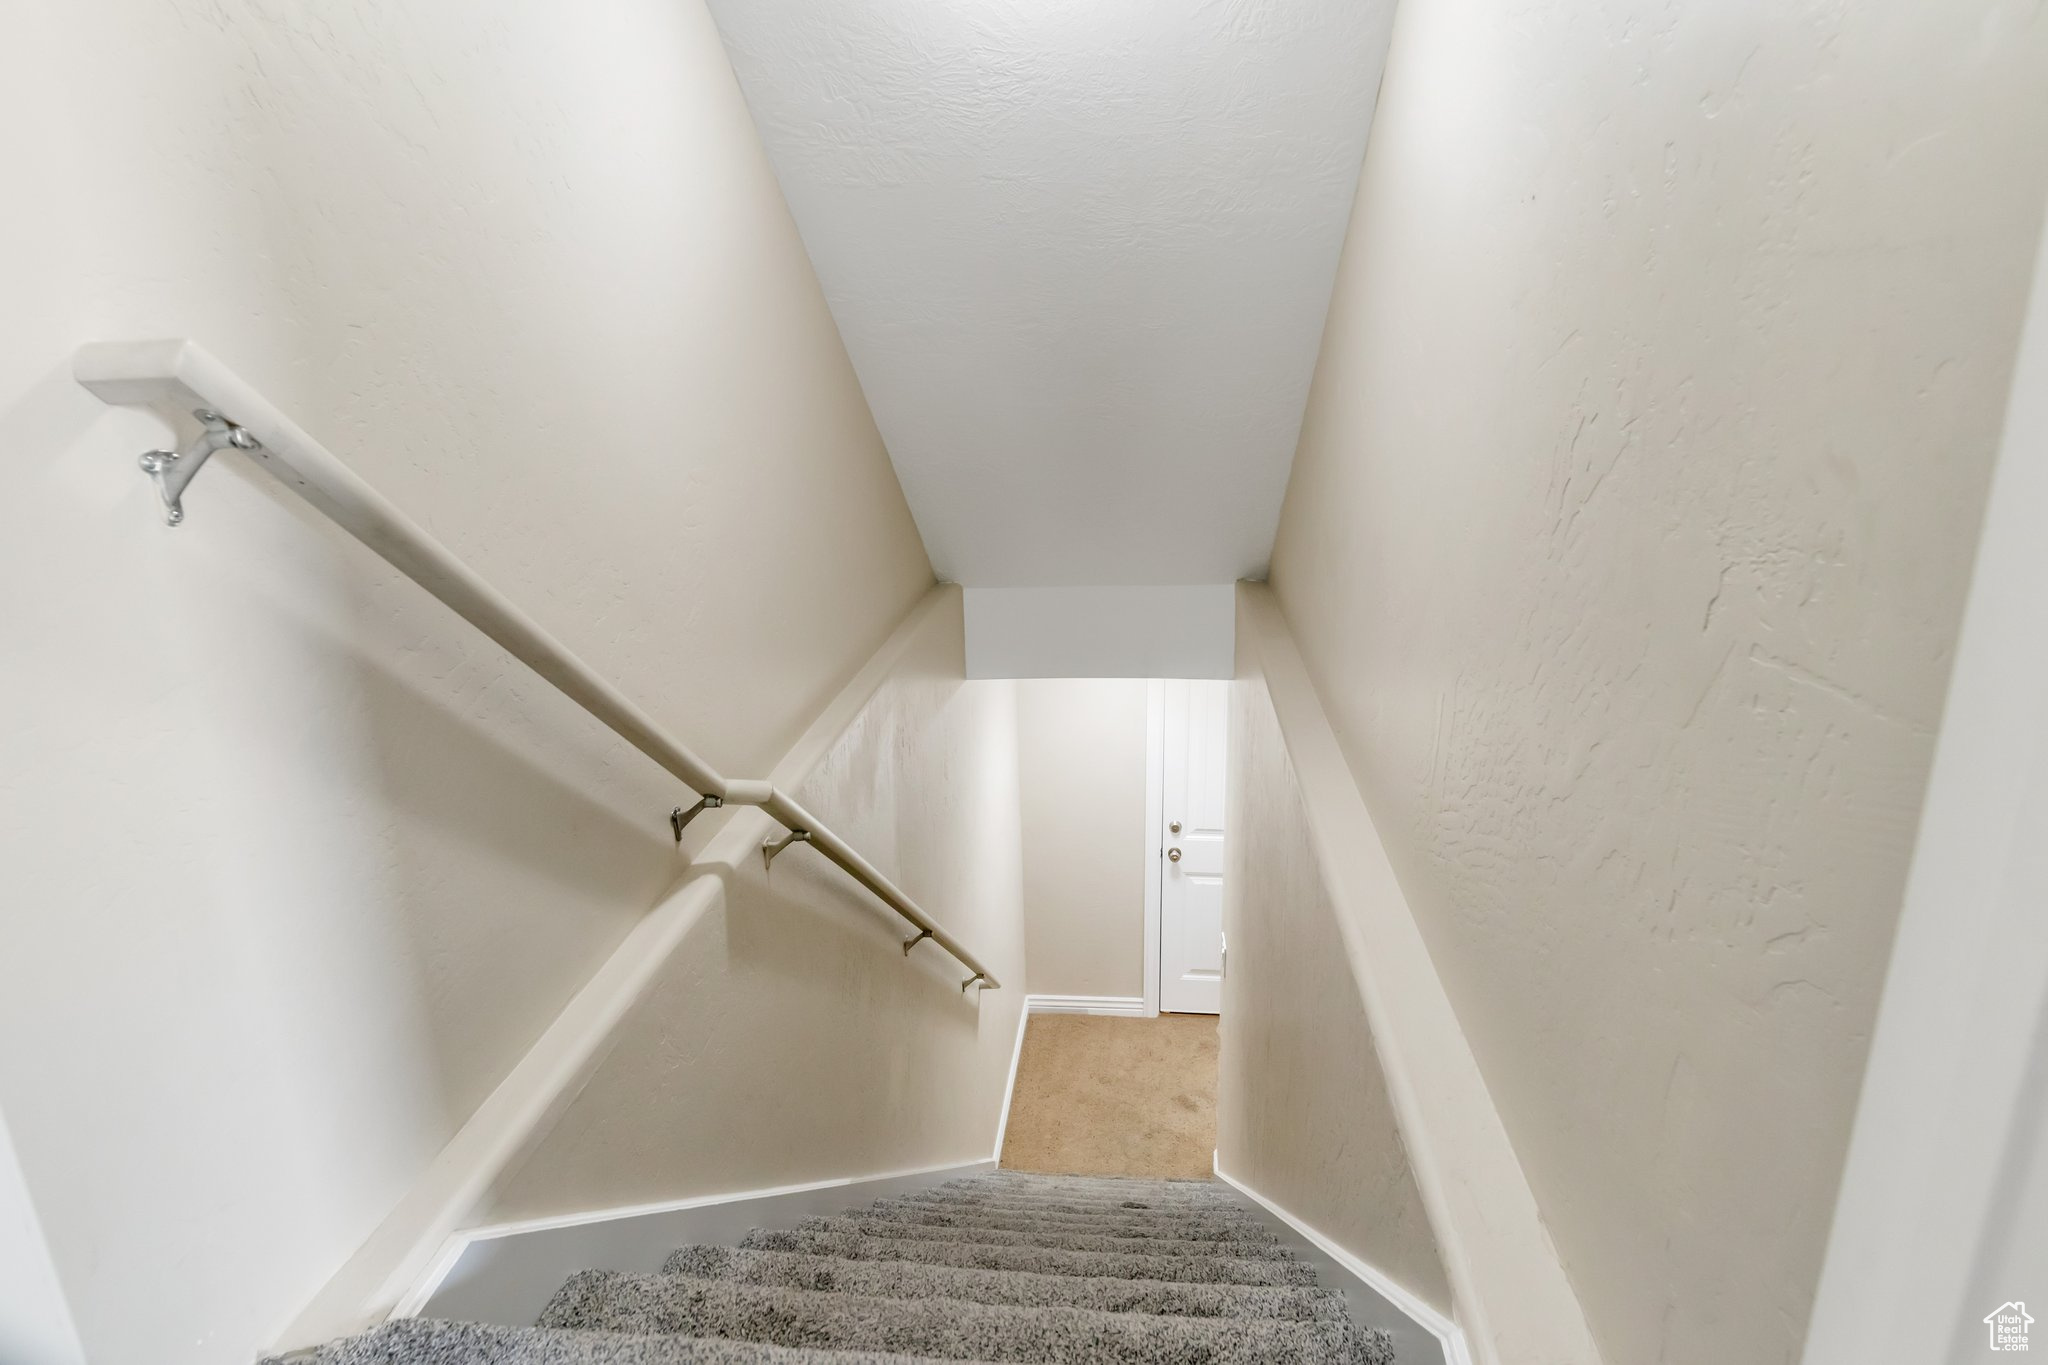 Stairs featuring light colored carpet